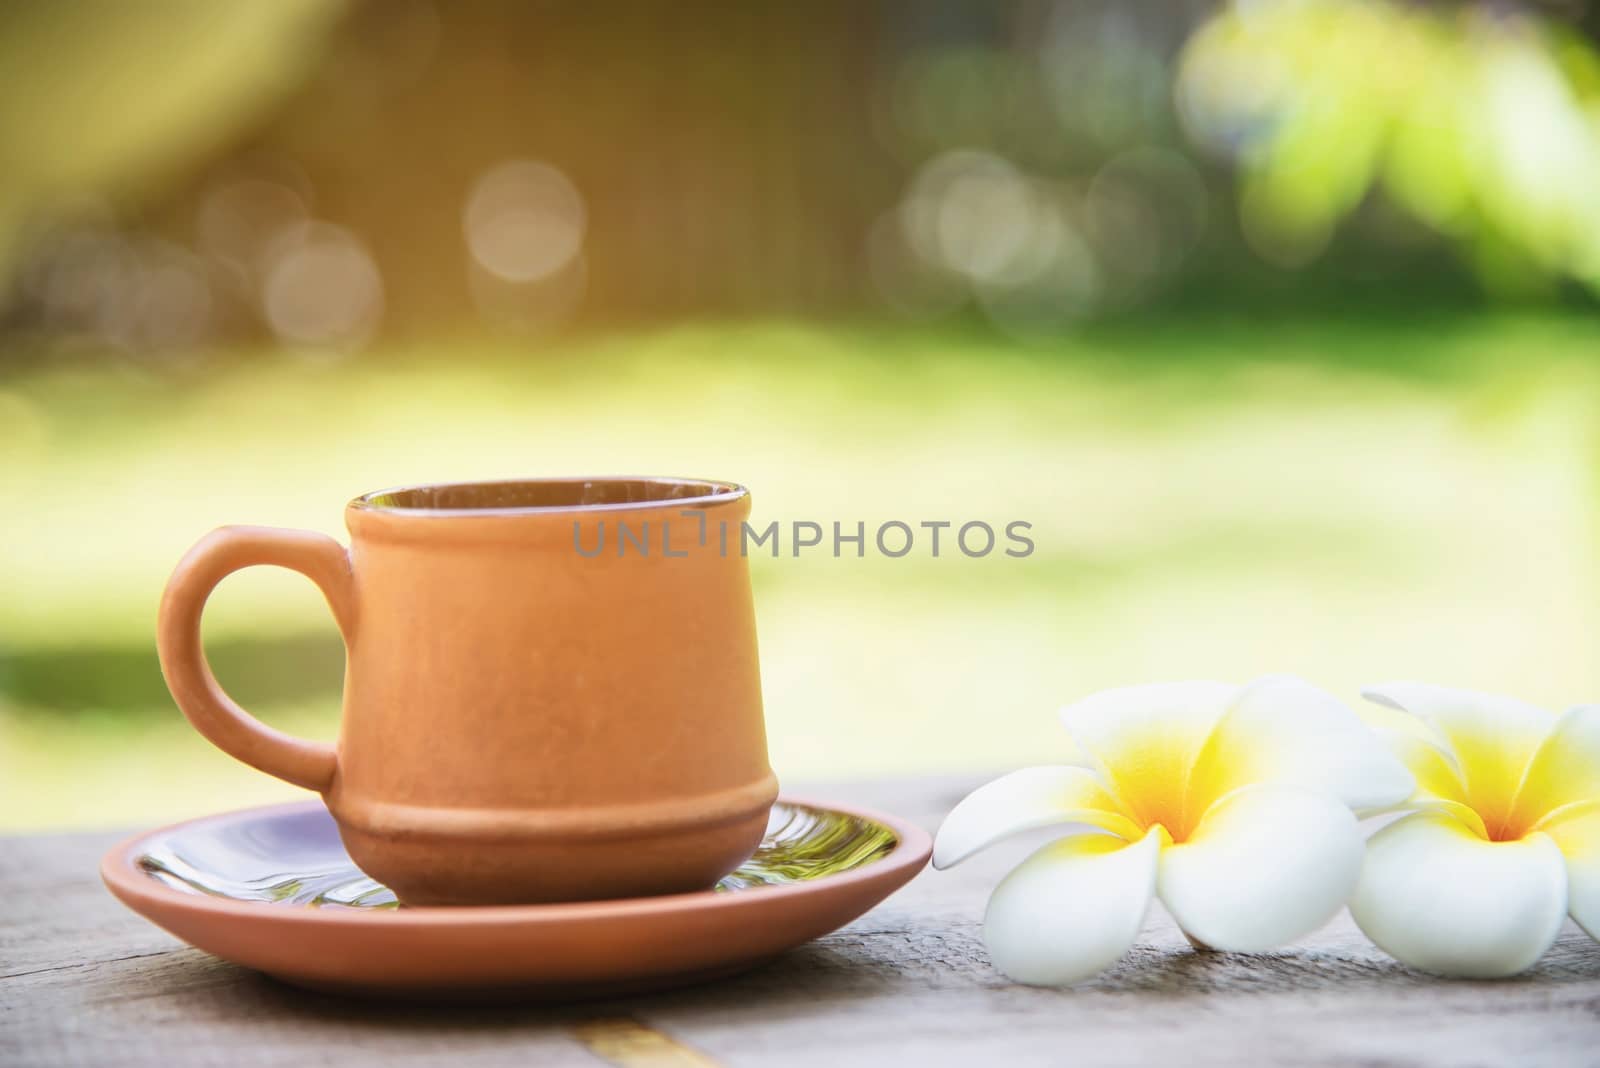 Coffee cup in green garden background - coffee with nature background concept by pairhandmade